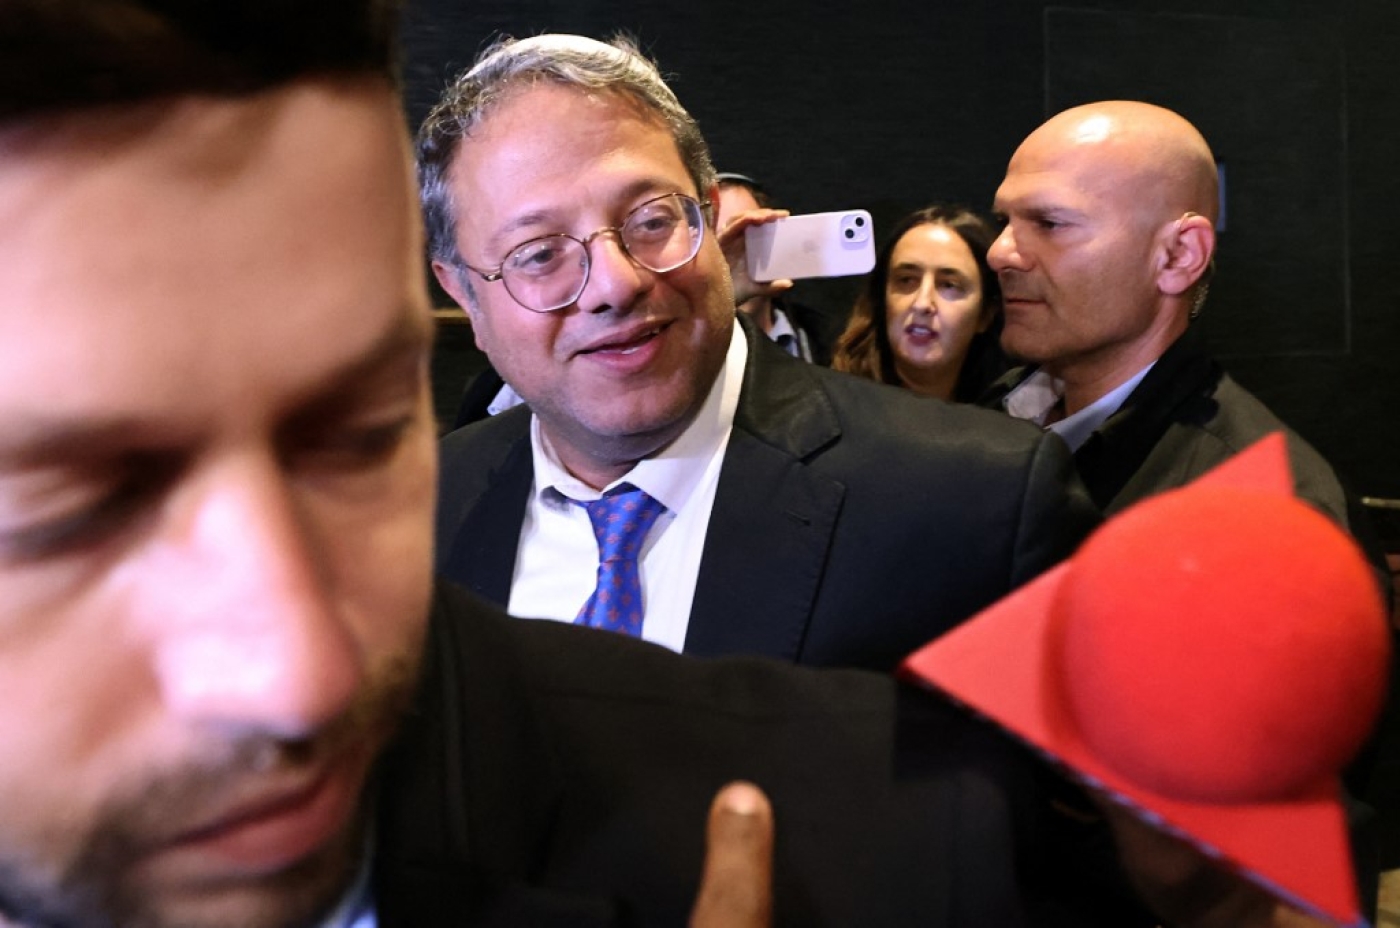 Leader of Israel's Jewish Power far-right party Itamar Ben Gvir speaks with supporters as he arrives to a hotel in Jerusalem before national election polls close on 1 November 2022 (AFP)